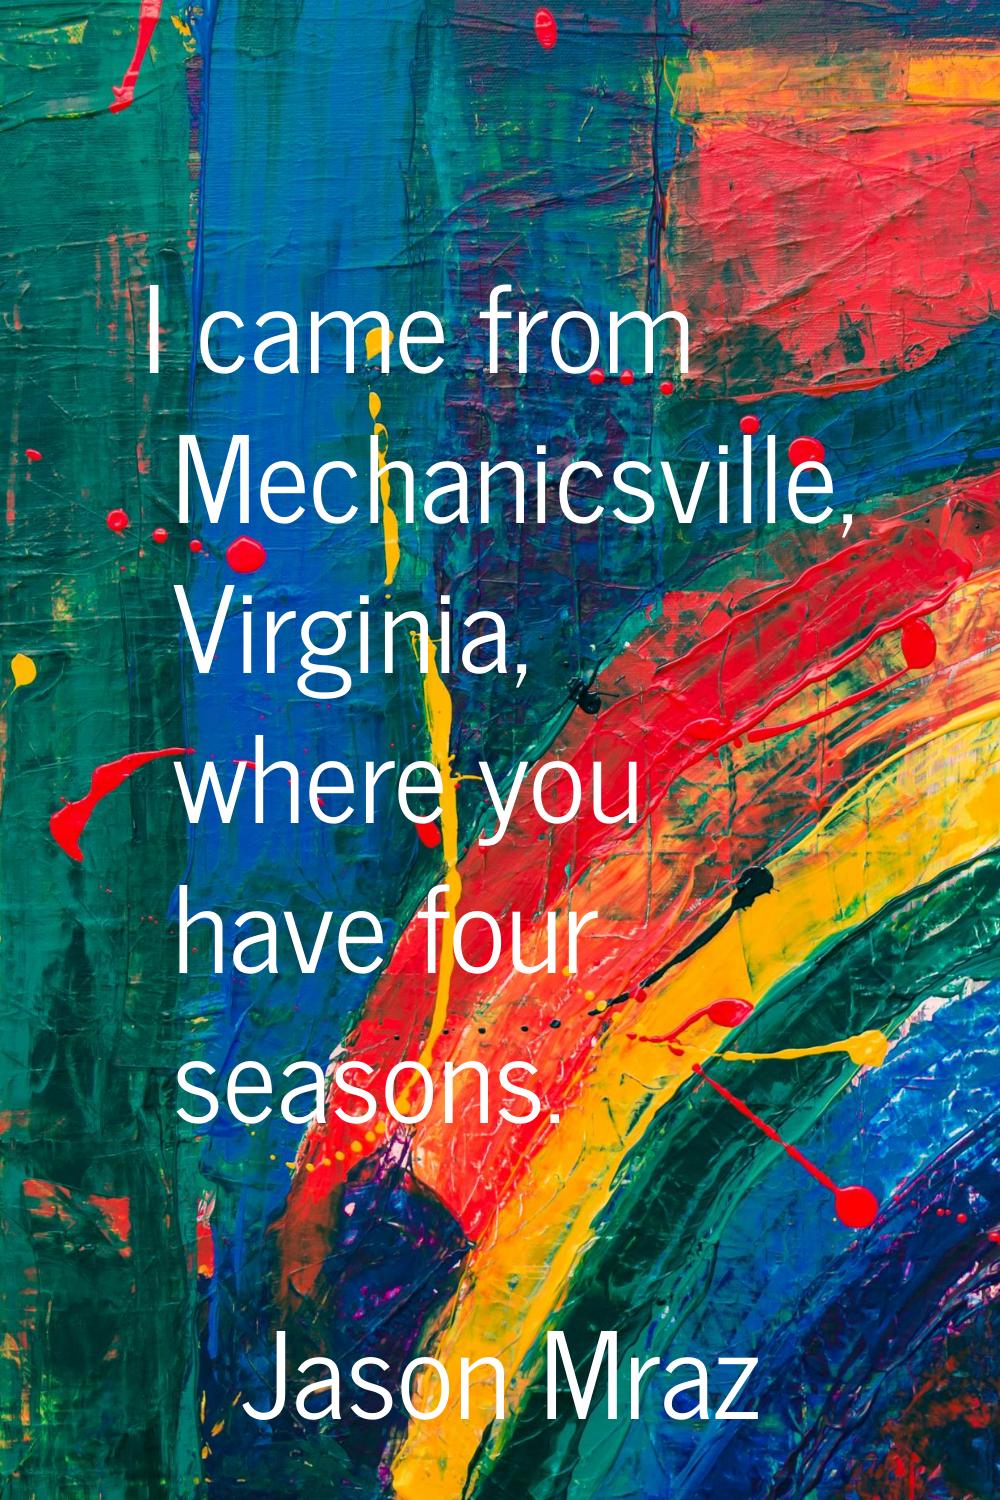 I came from Mechanicsville, Virginia, where you have four seasons.